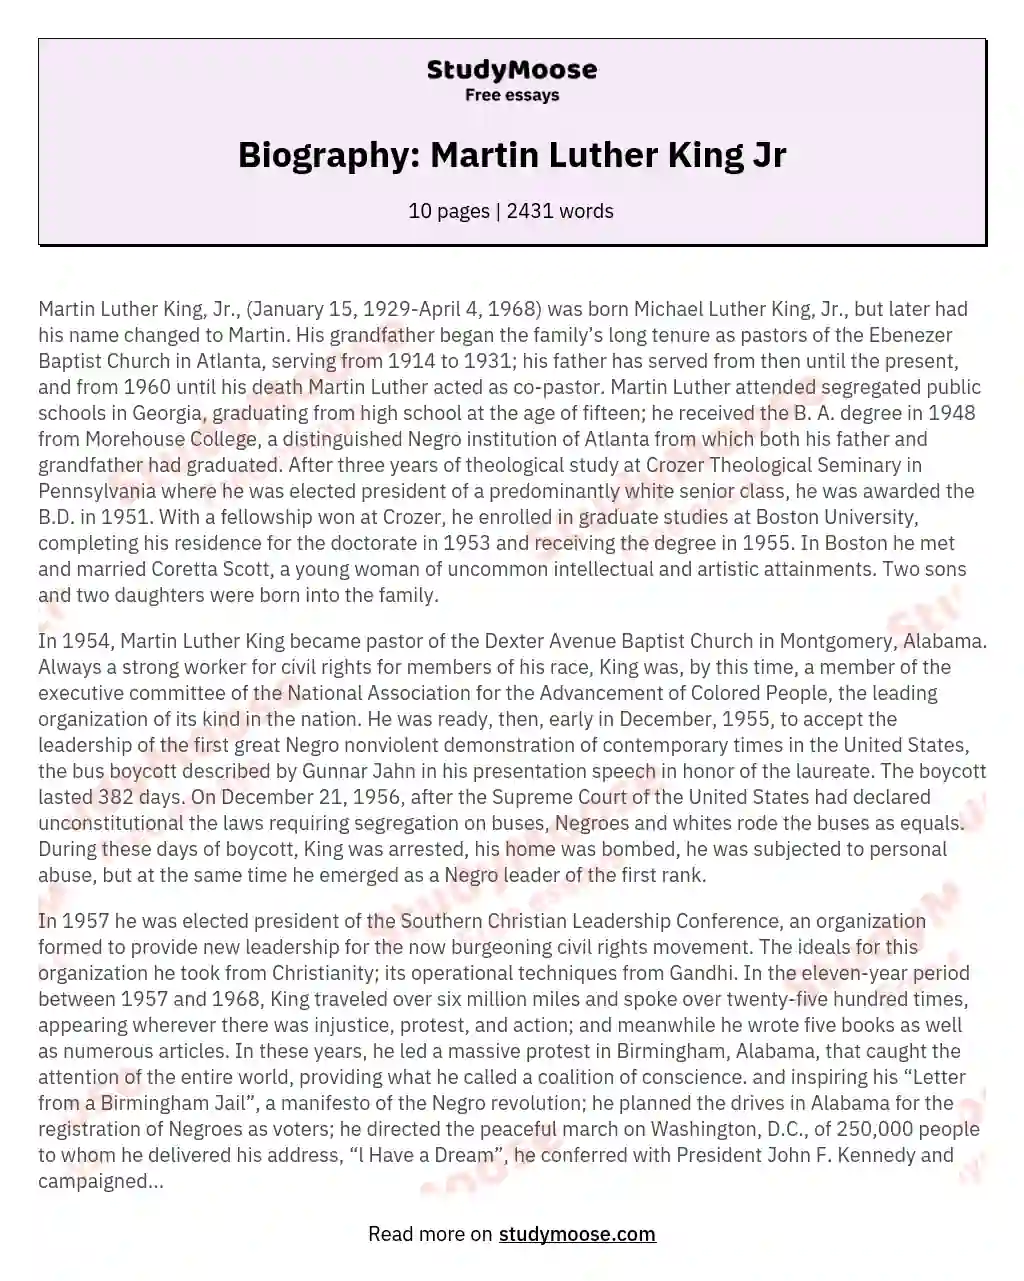 Biography: Martin Luther King Jr